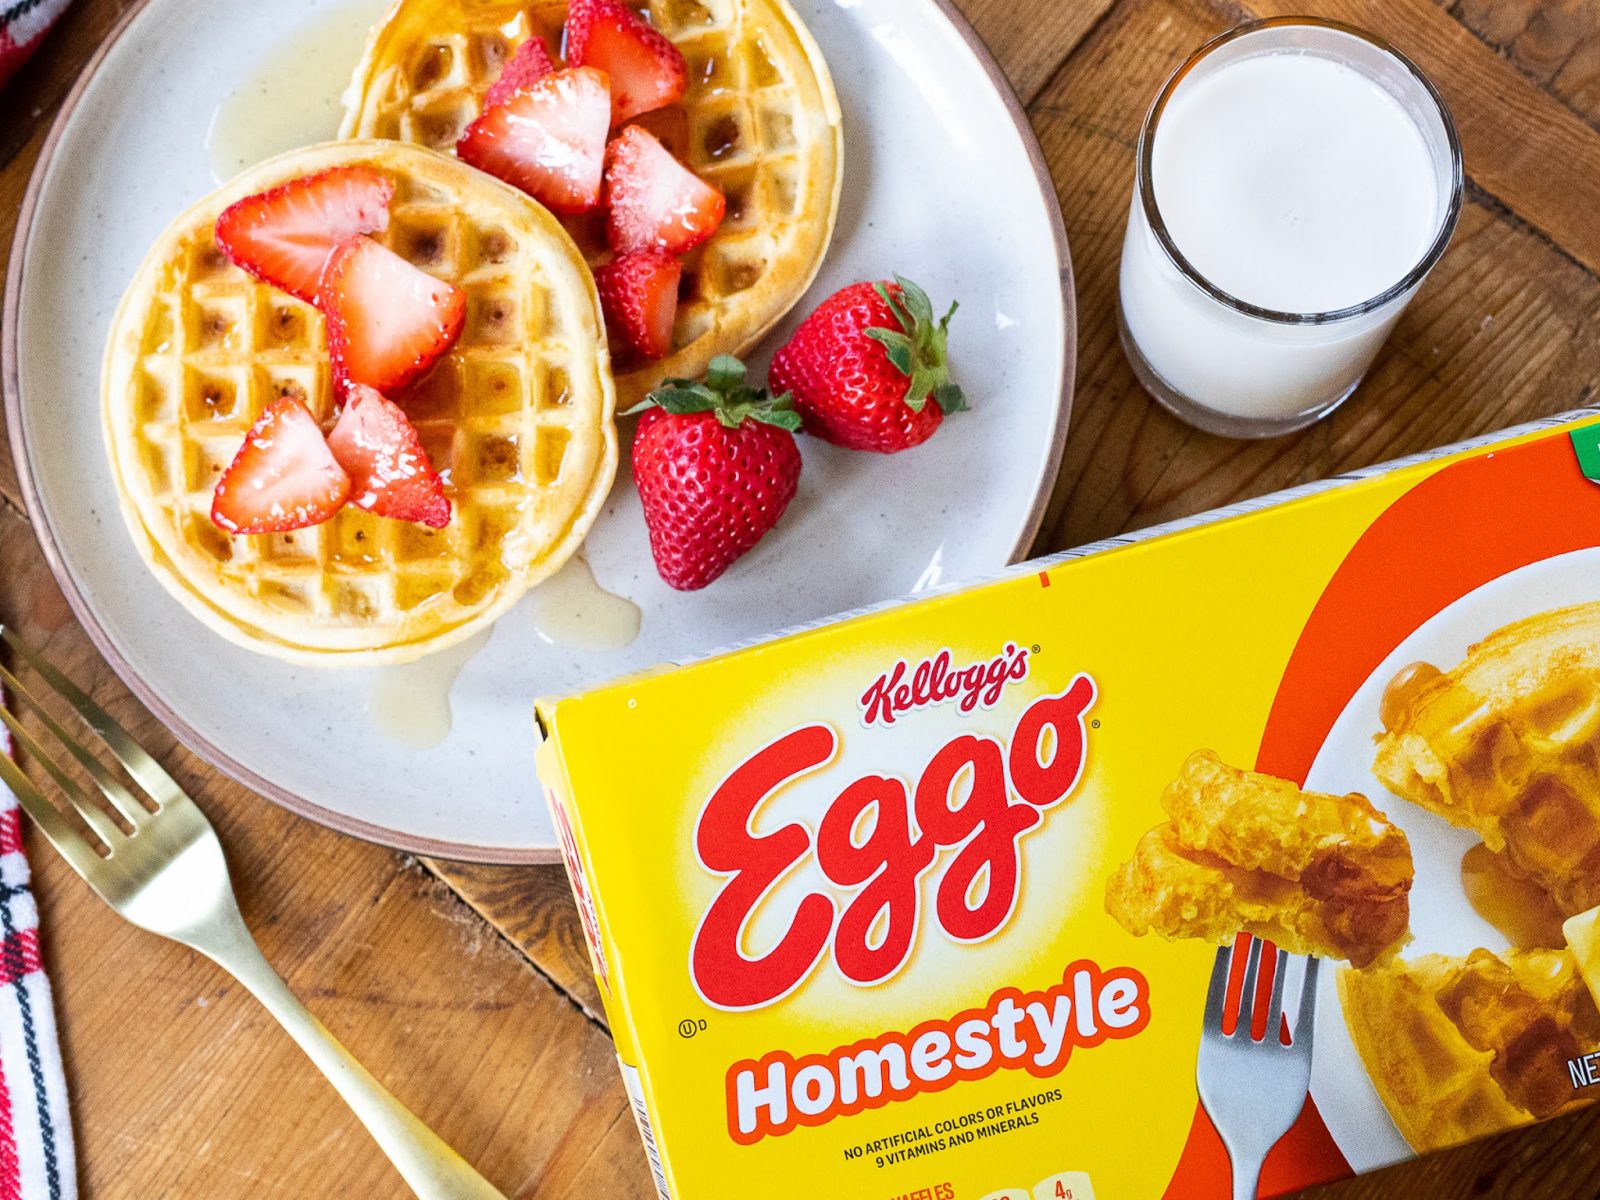 Get The Boxes Of Kellogg’s Eggo Waffles As Low As $1.69 Each At Kroger